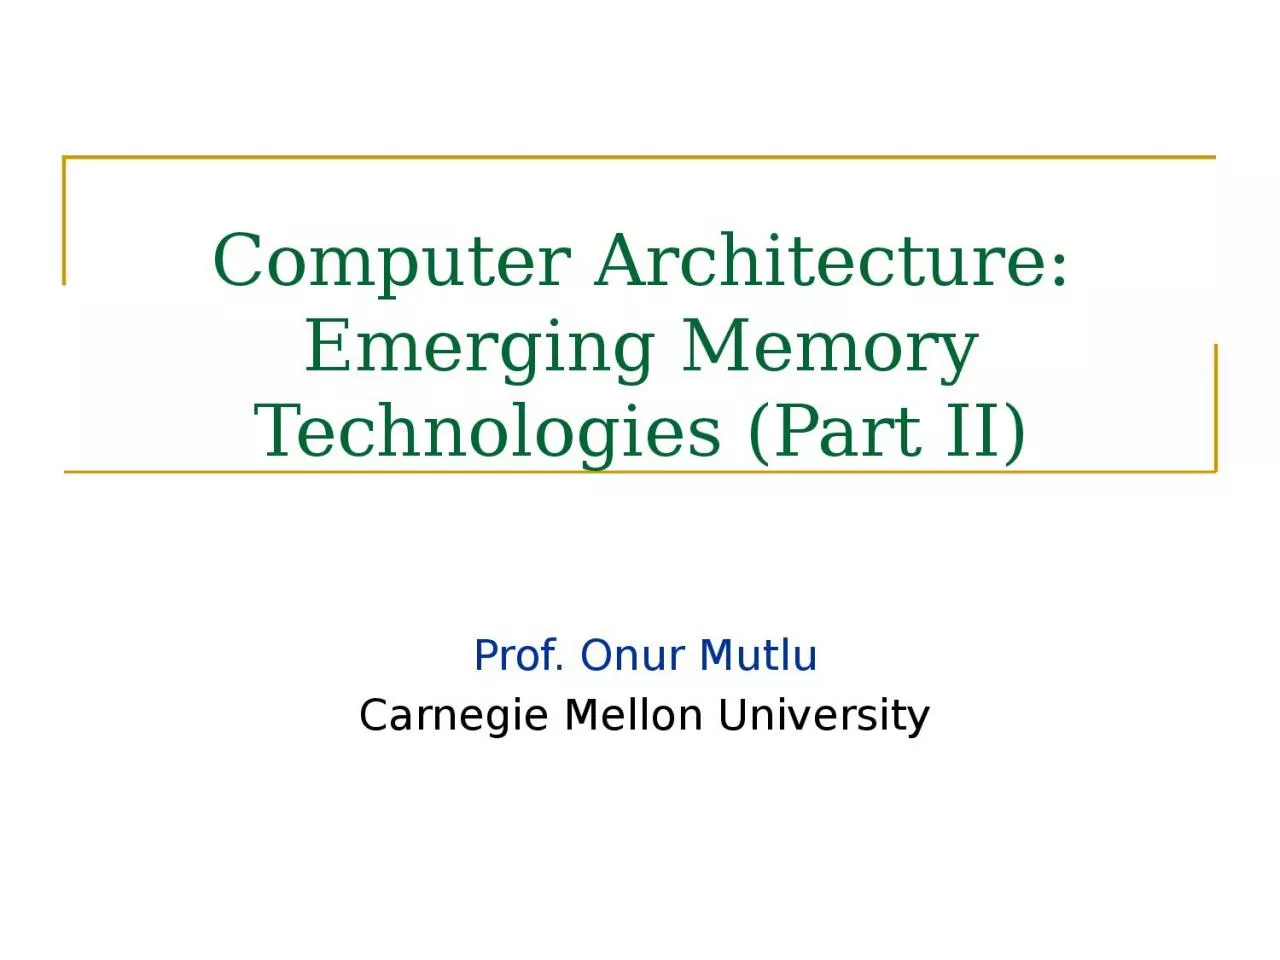 Computer Architecture: Emerging Memory Technologies (Part II)